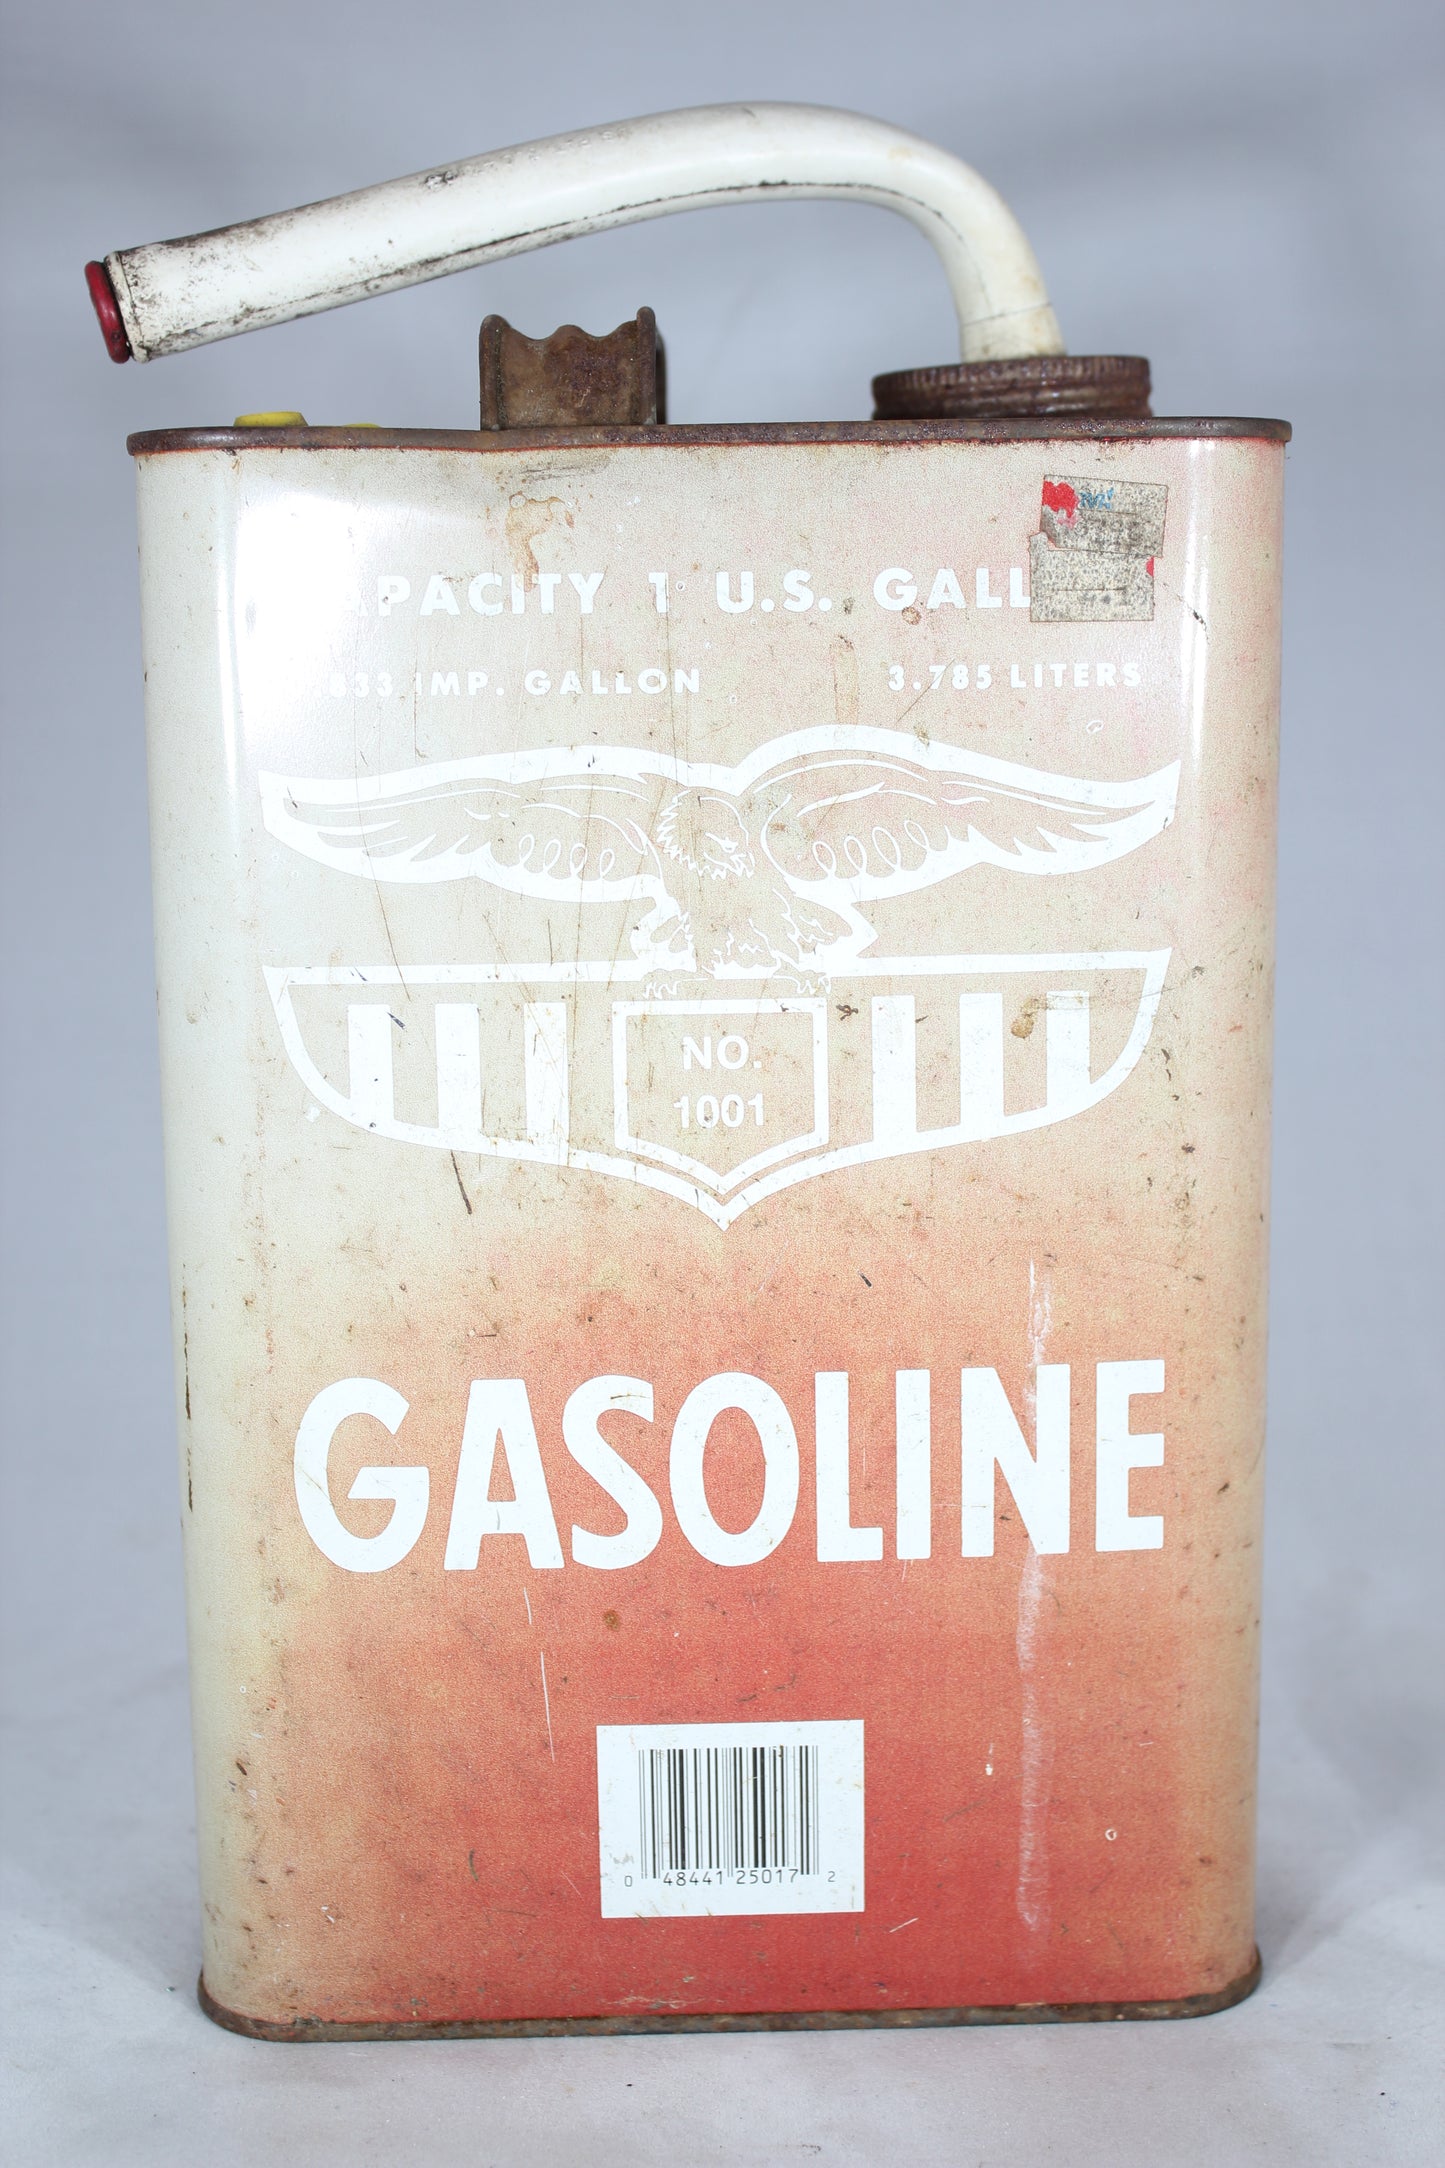 One Gallon Red Gas Can by Eagle, No. 1001